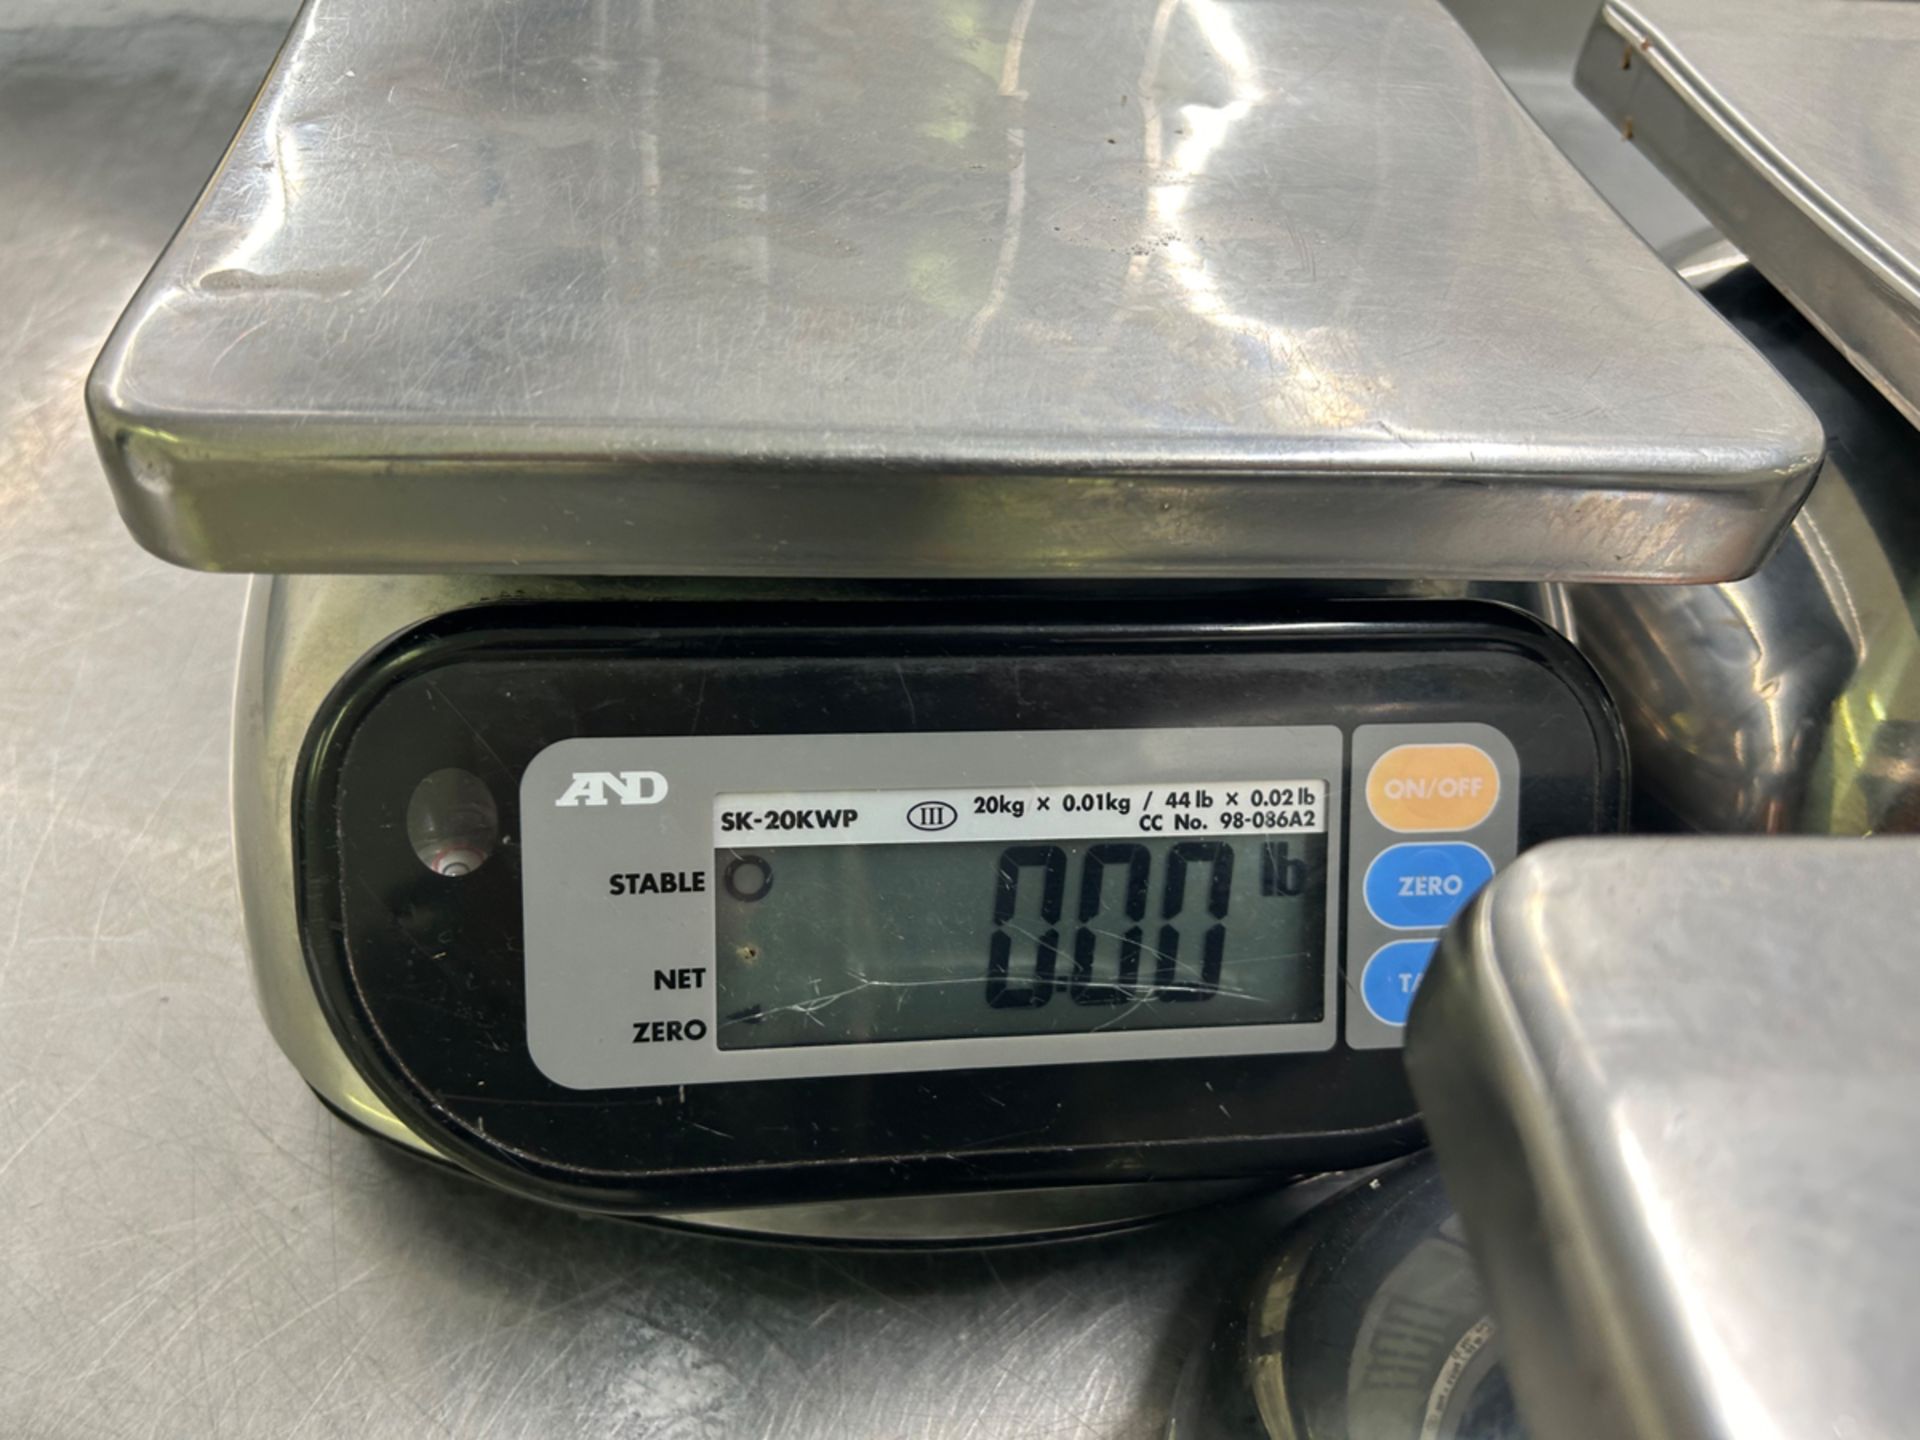 {Each} A&D Weighing A&D SK-20KWP Digital Stainless Steel Washdown Scale - Image 3 of 4